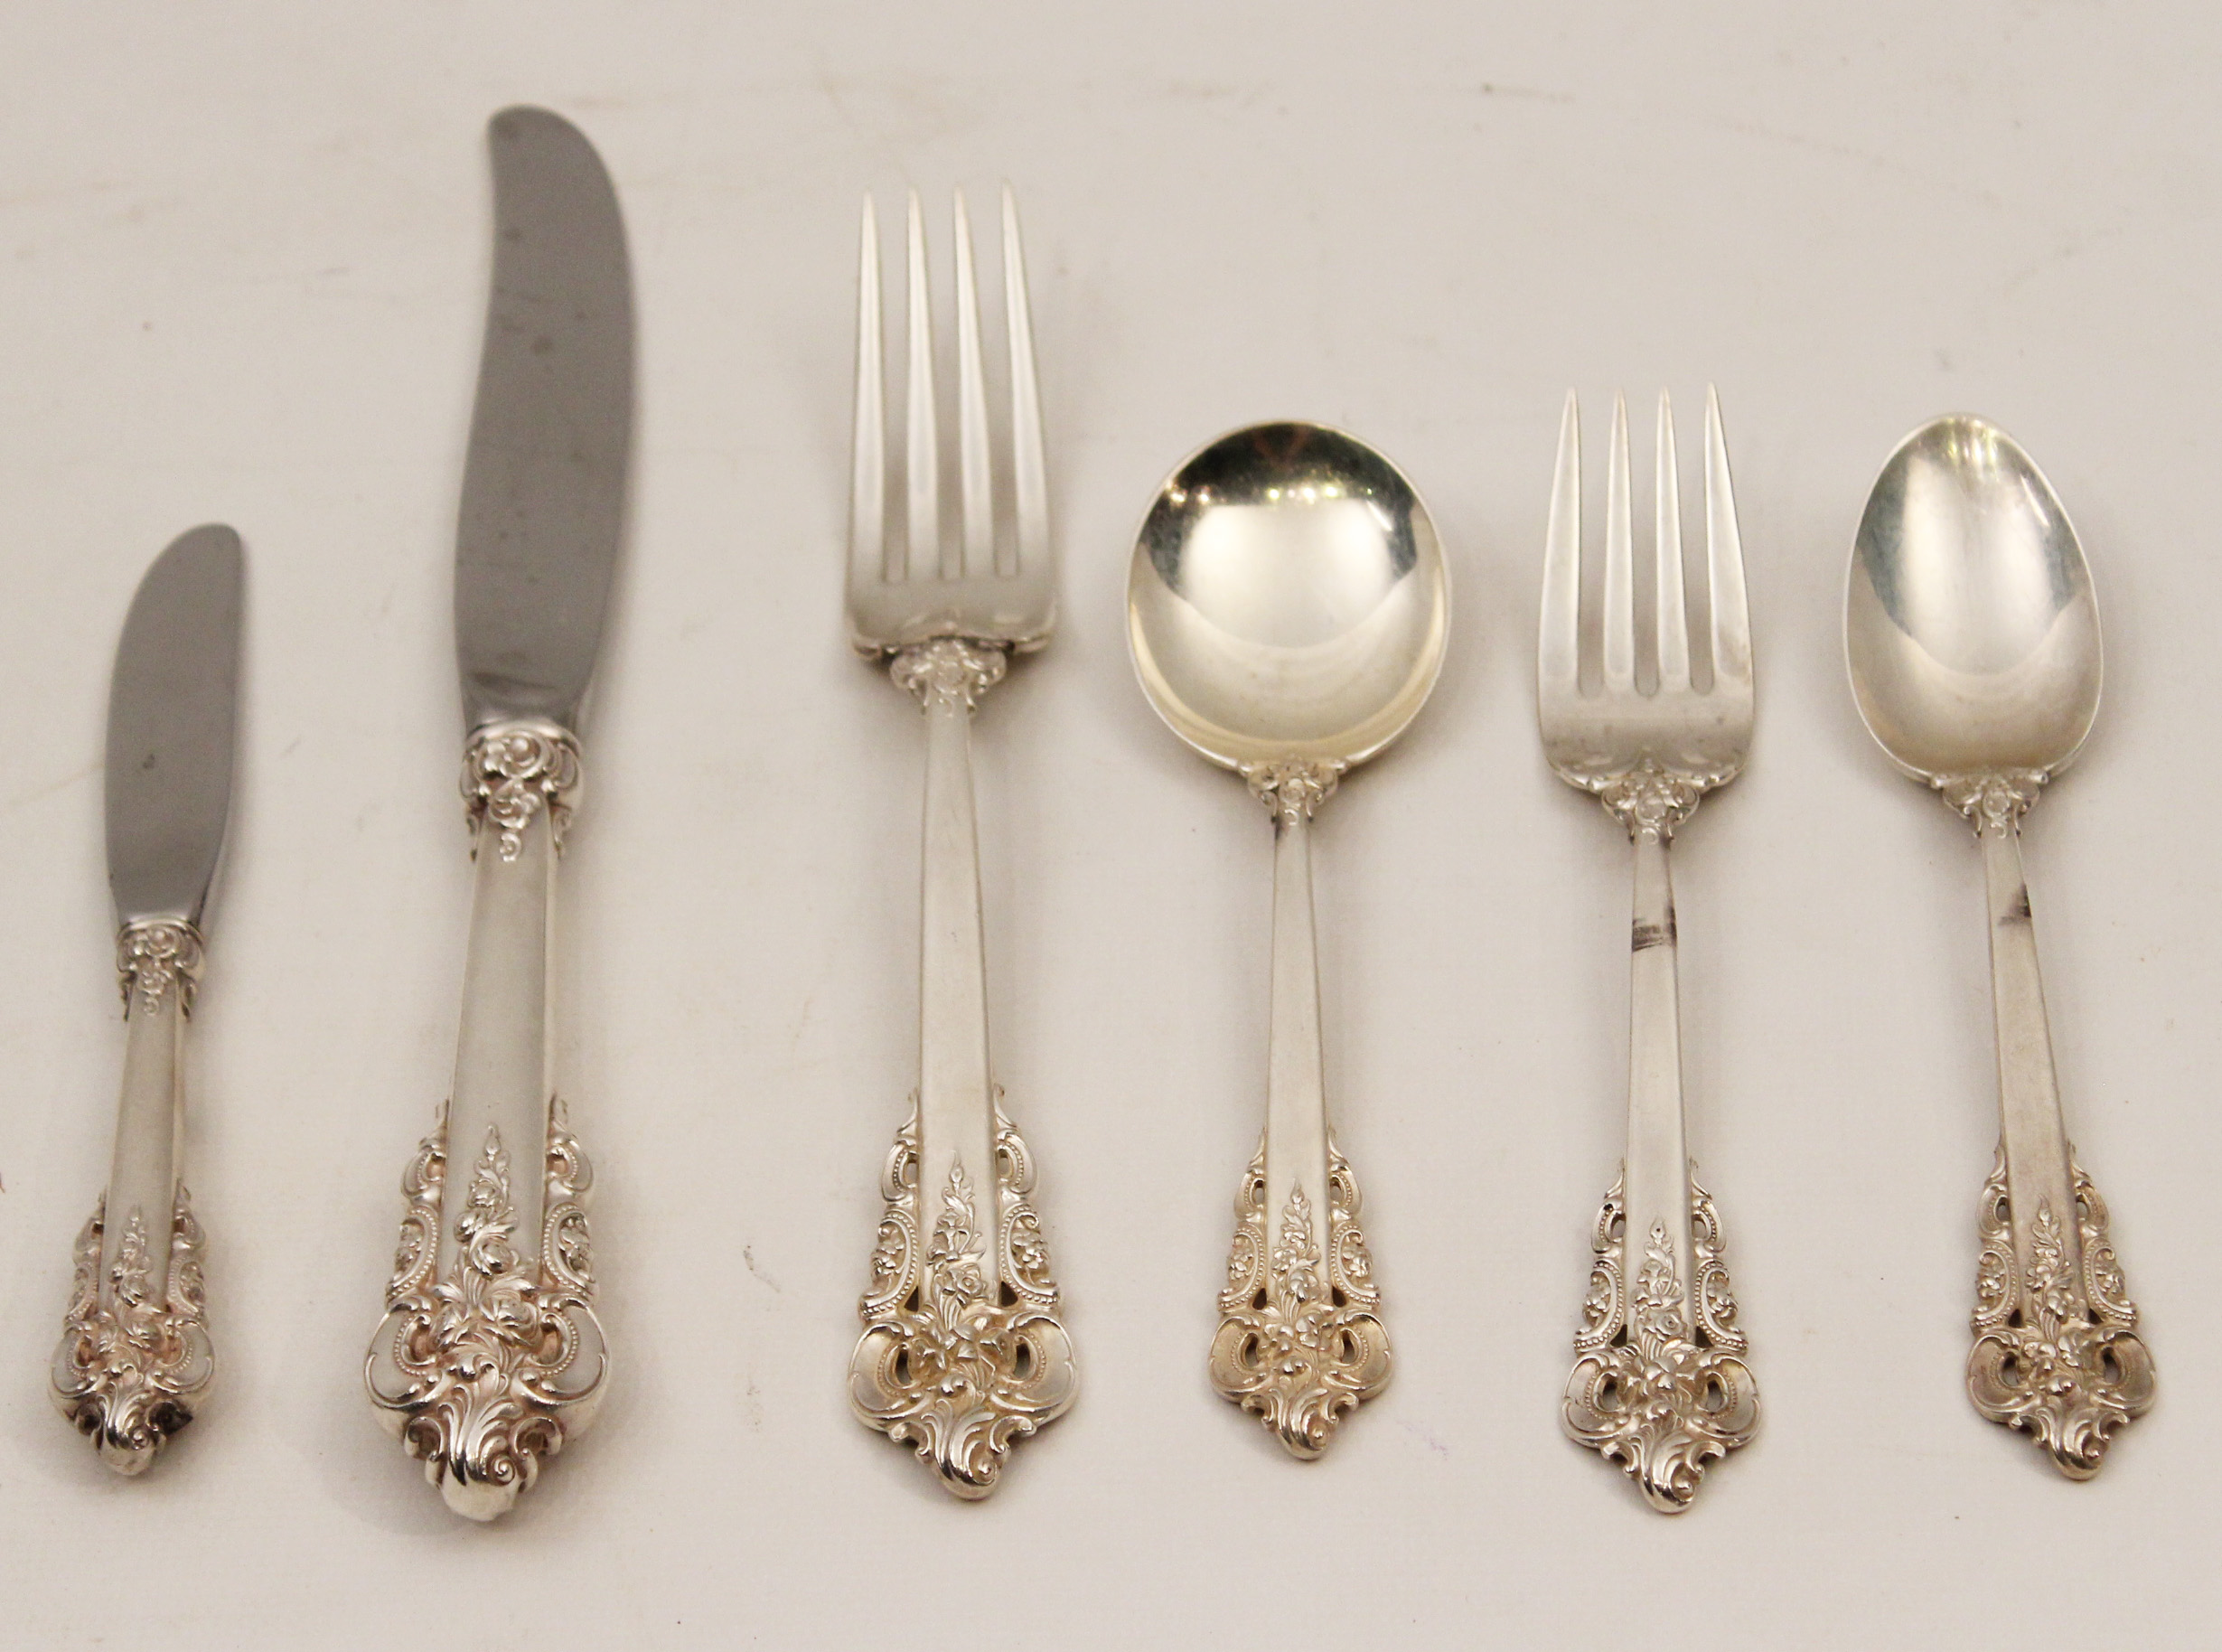 72 PC.  "GRAND BAROQUE" STERLING